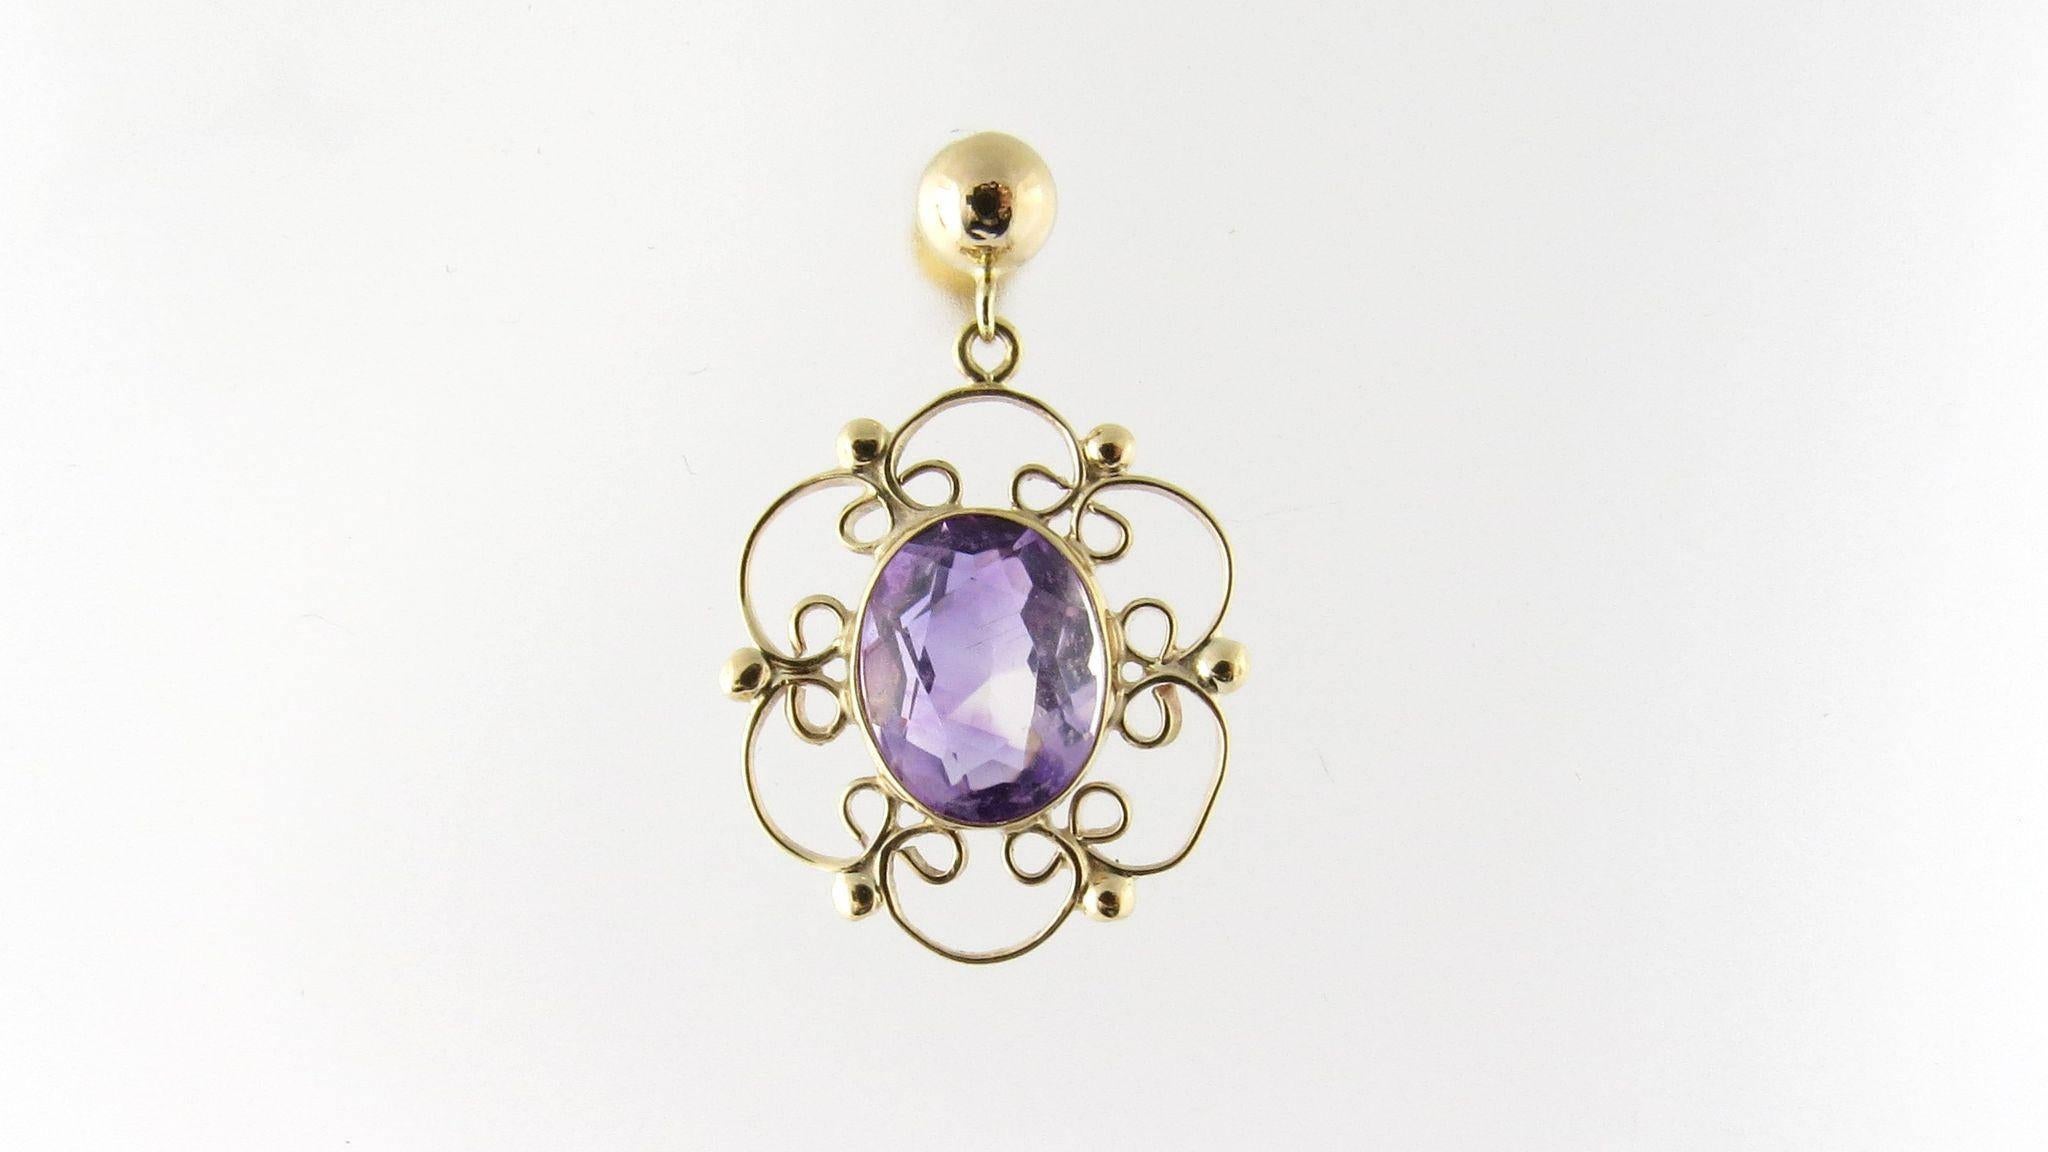 Vintage 18k Yellow Gold and Genuine Amethyst Dangling Earrings 

The center amethysts in these earrings are surrounded by swirls and bows of gold. 

Made for pierced ears, the earrings hang down approximately 28 mm. They are 18 mm across. 

The